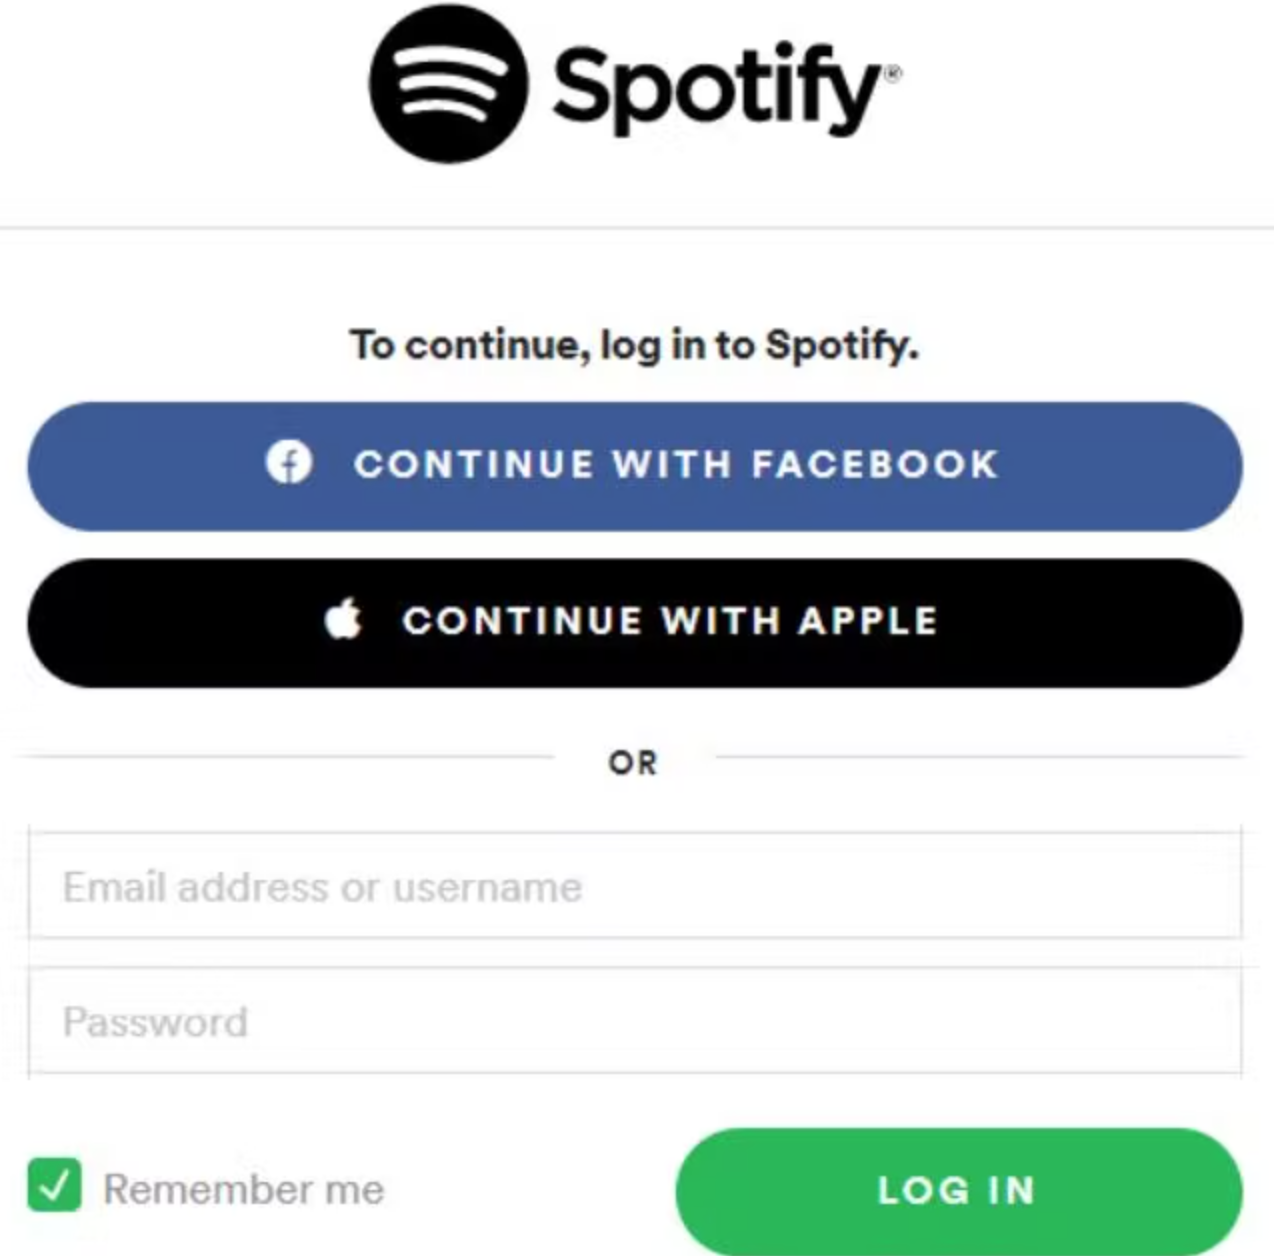 Spotify log in options